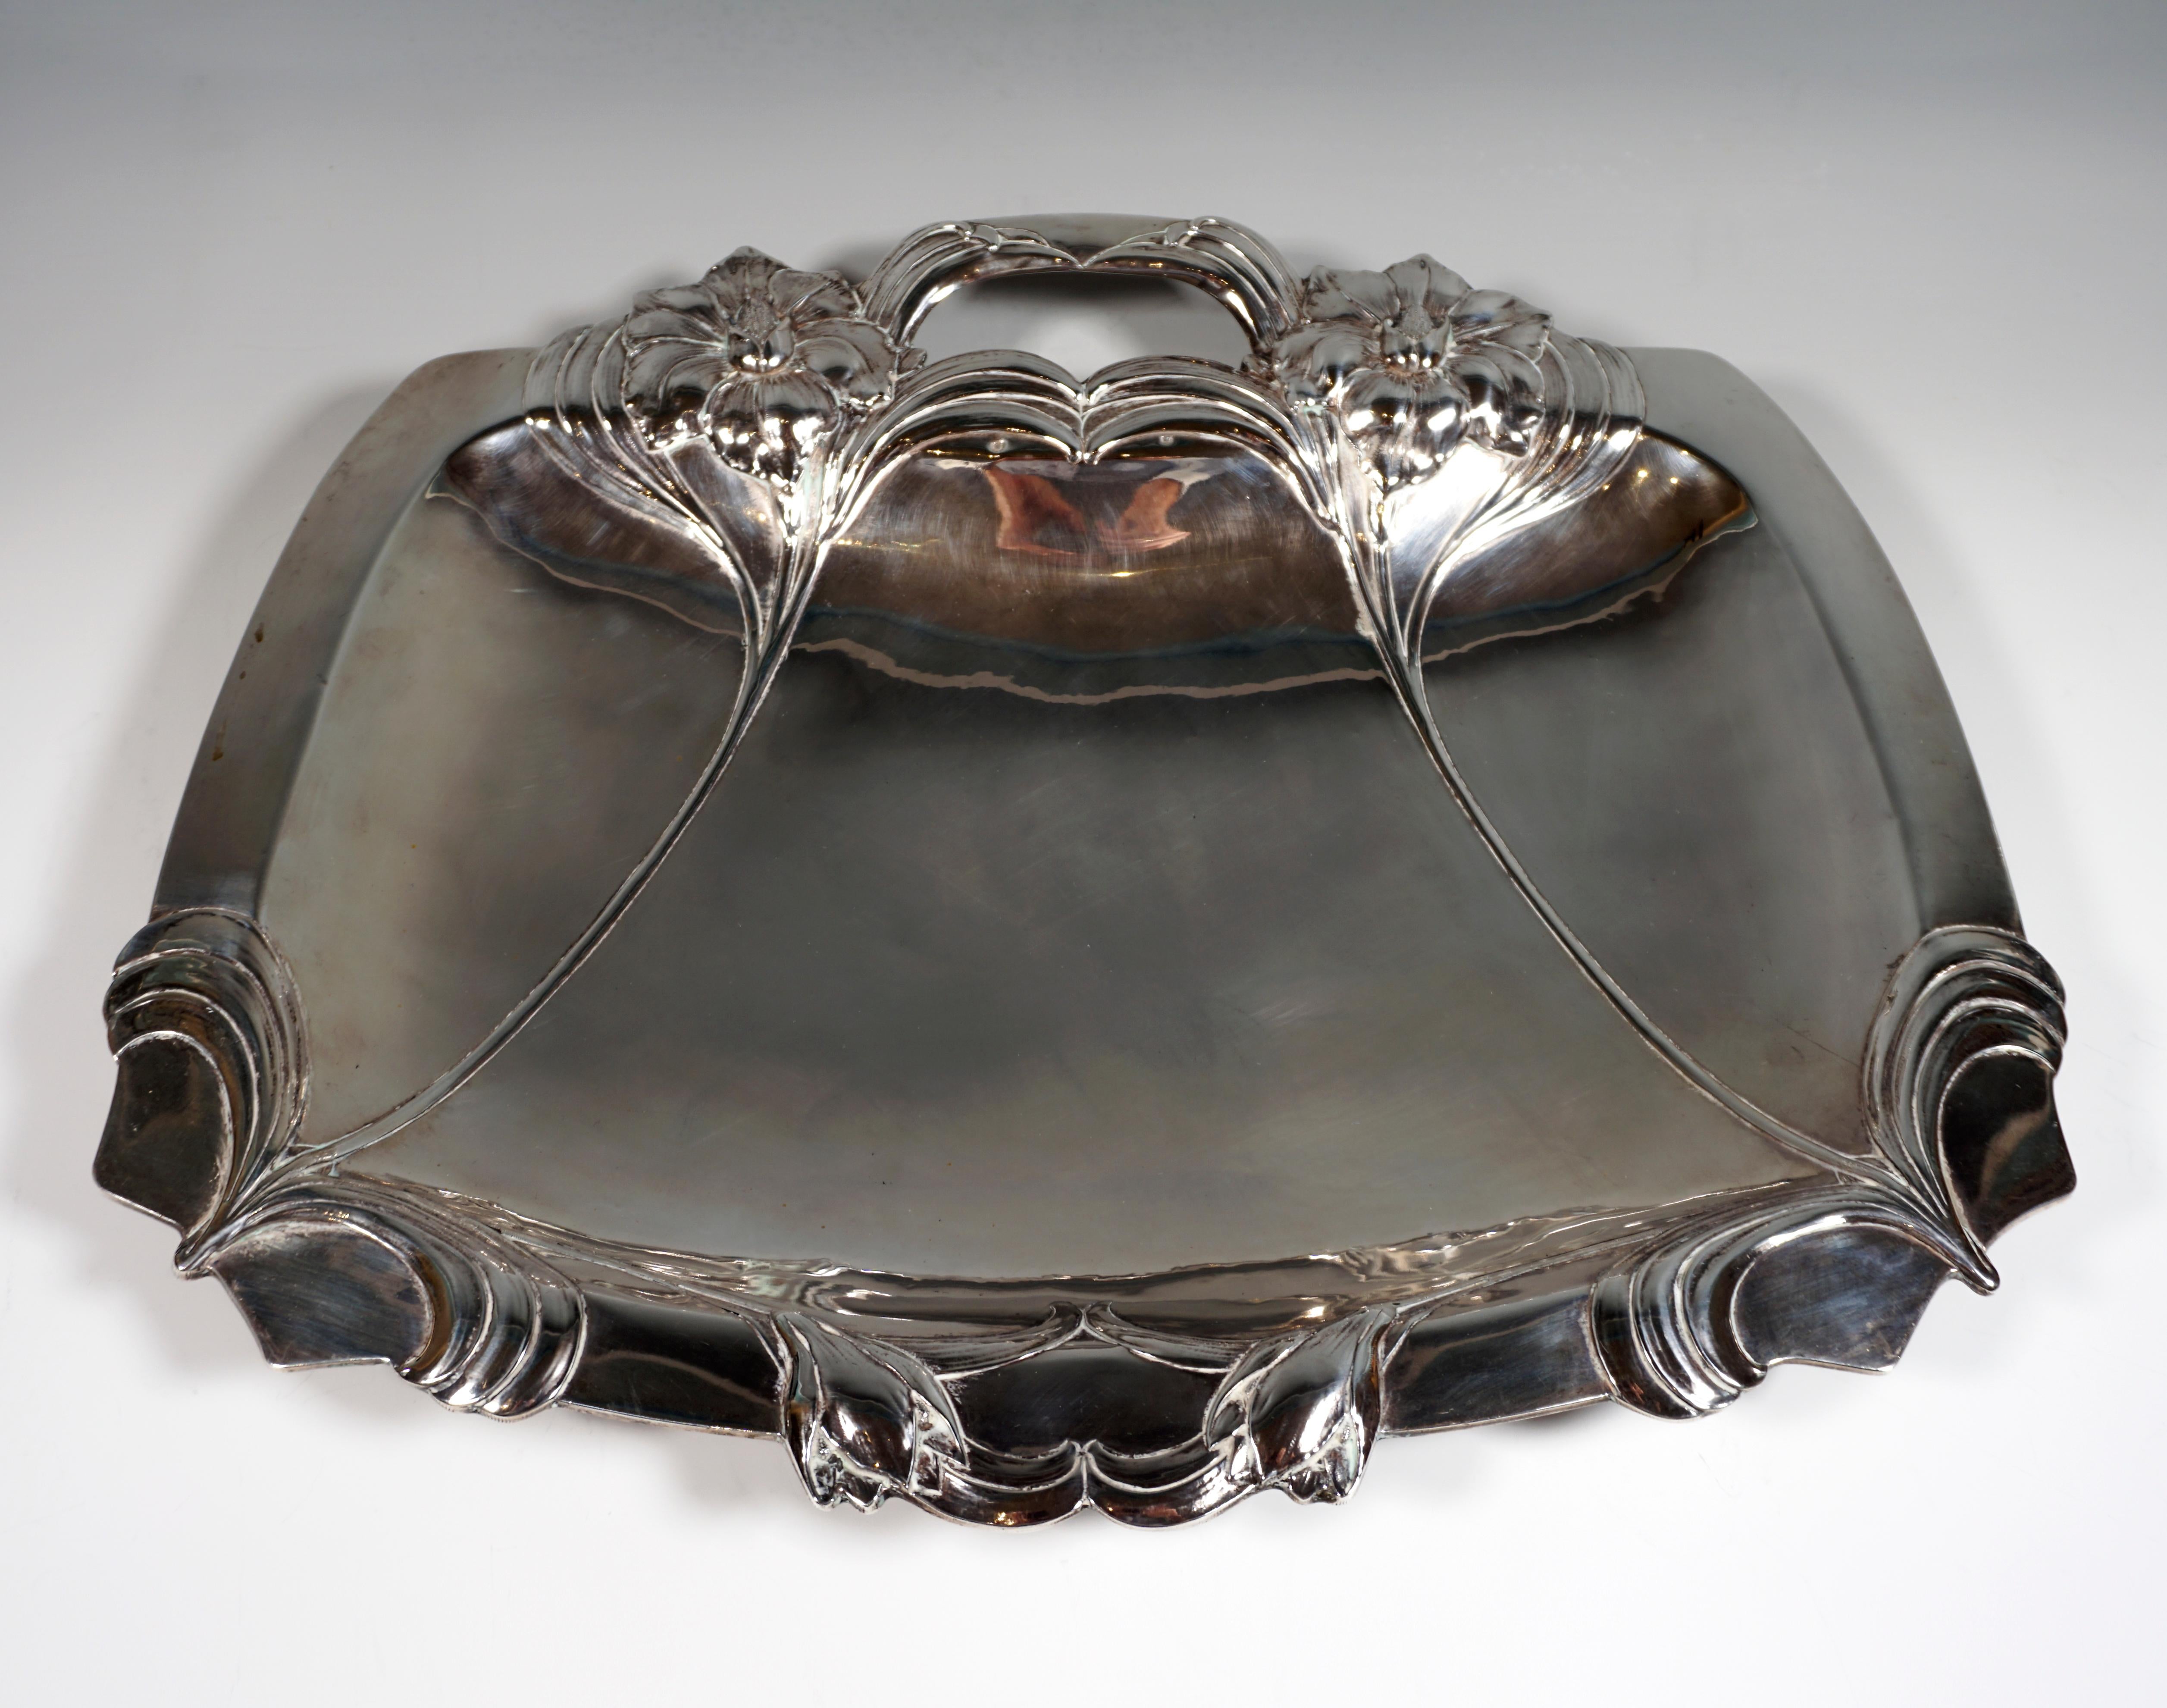 Wide silver bowl in a trapezoidal shape standing on four appliquéd feet, one-sided handle in the extension of two relief flower stalks with flowers and stylized leaves that arise in the opposite, rounded corners, irregular edge due to the flowers